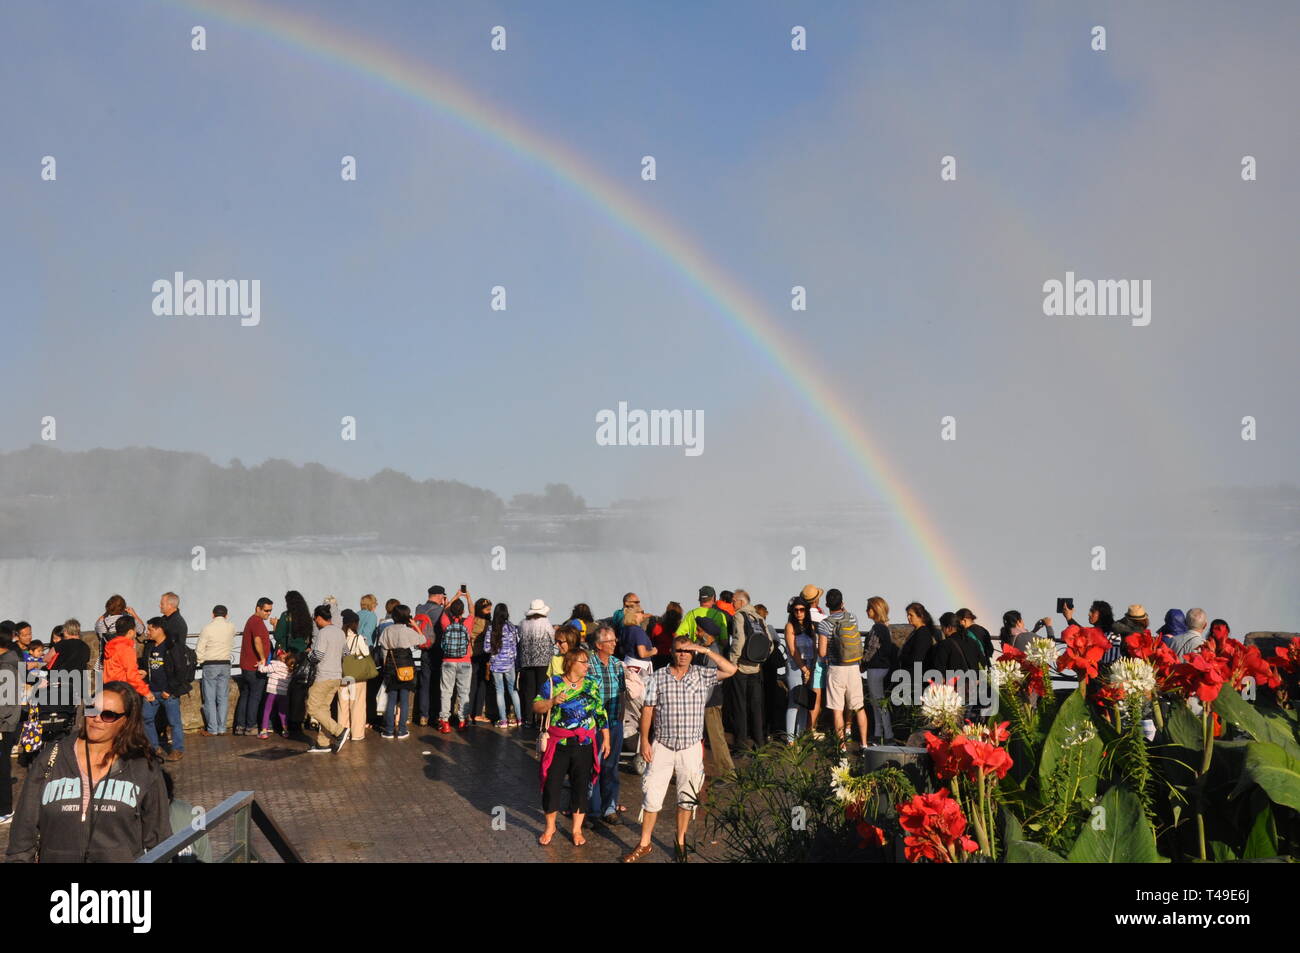 Niagara Falls, Canada - September 10, 2018 - Rainbow of People and Canni Lilies at Table Rock Viewing Horseshoe Falls - Editorial Stock Photo